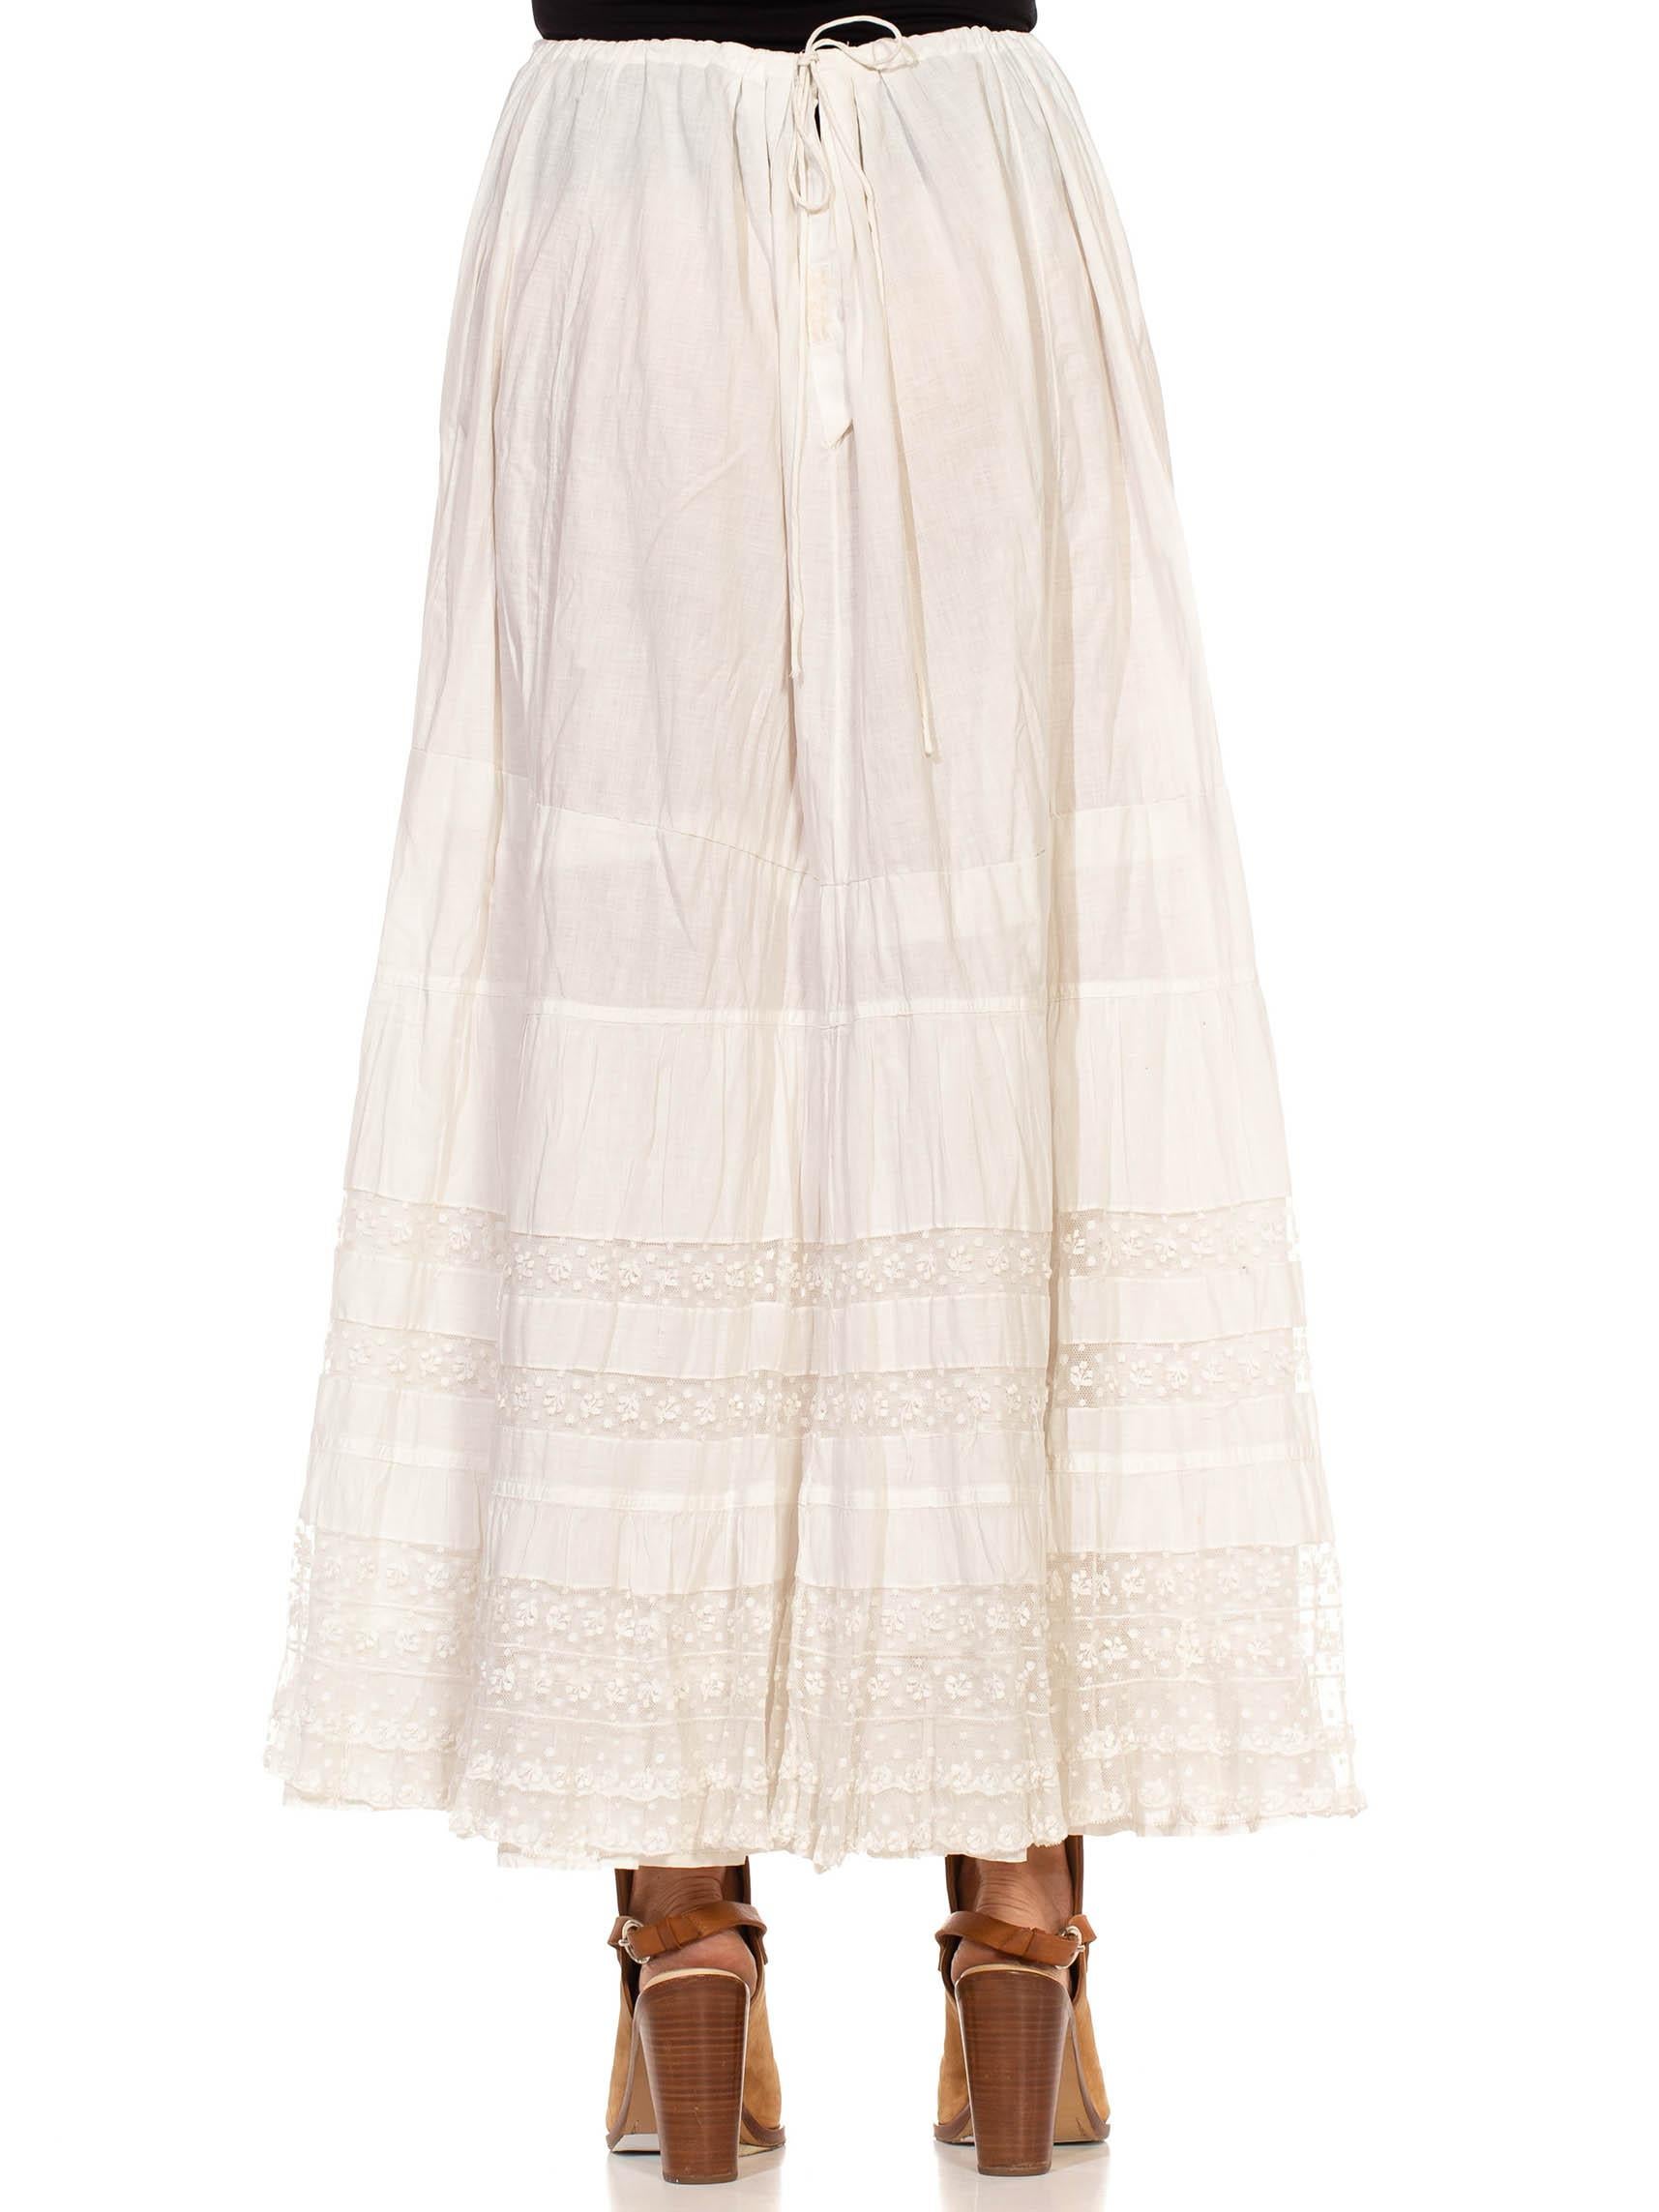 Victorian White Organic Cotton Skirt With Cherry Lace For Sale 2